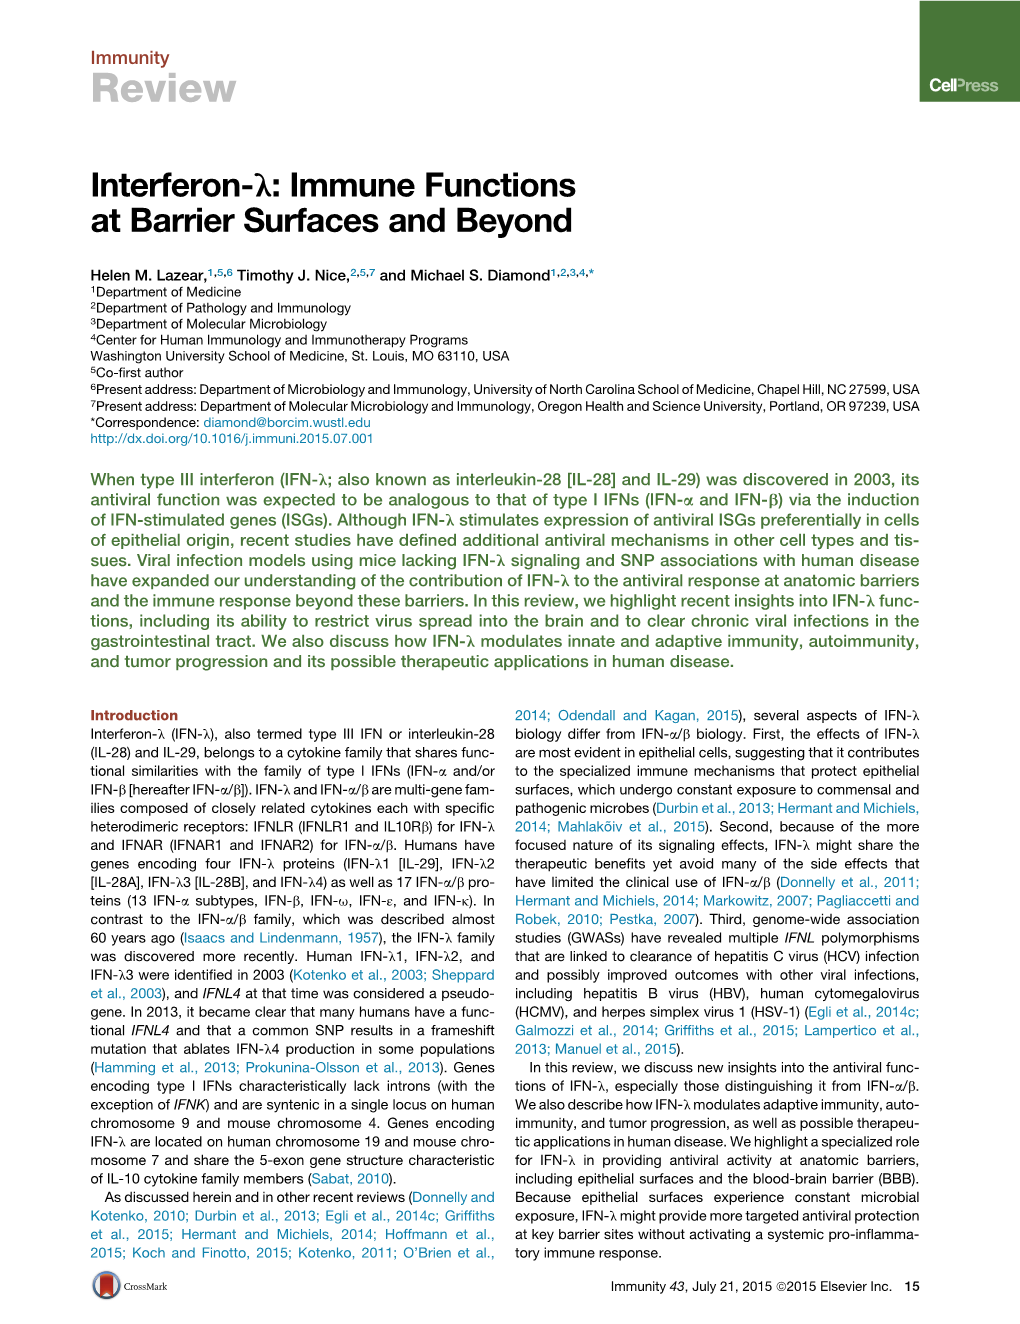 Interferon-L: Immune Functions at Barrier Surfaces and Beyond